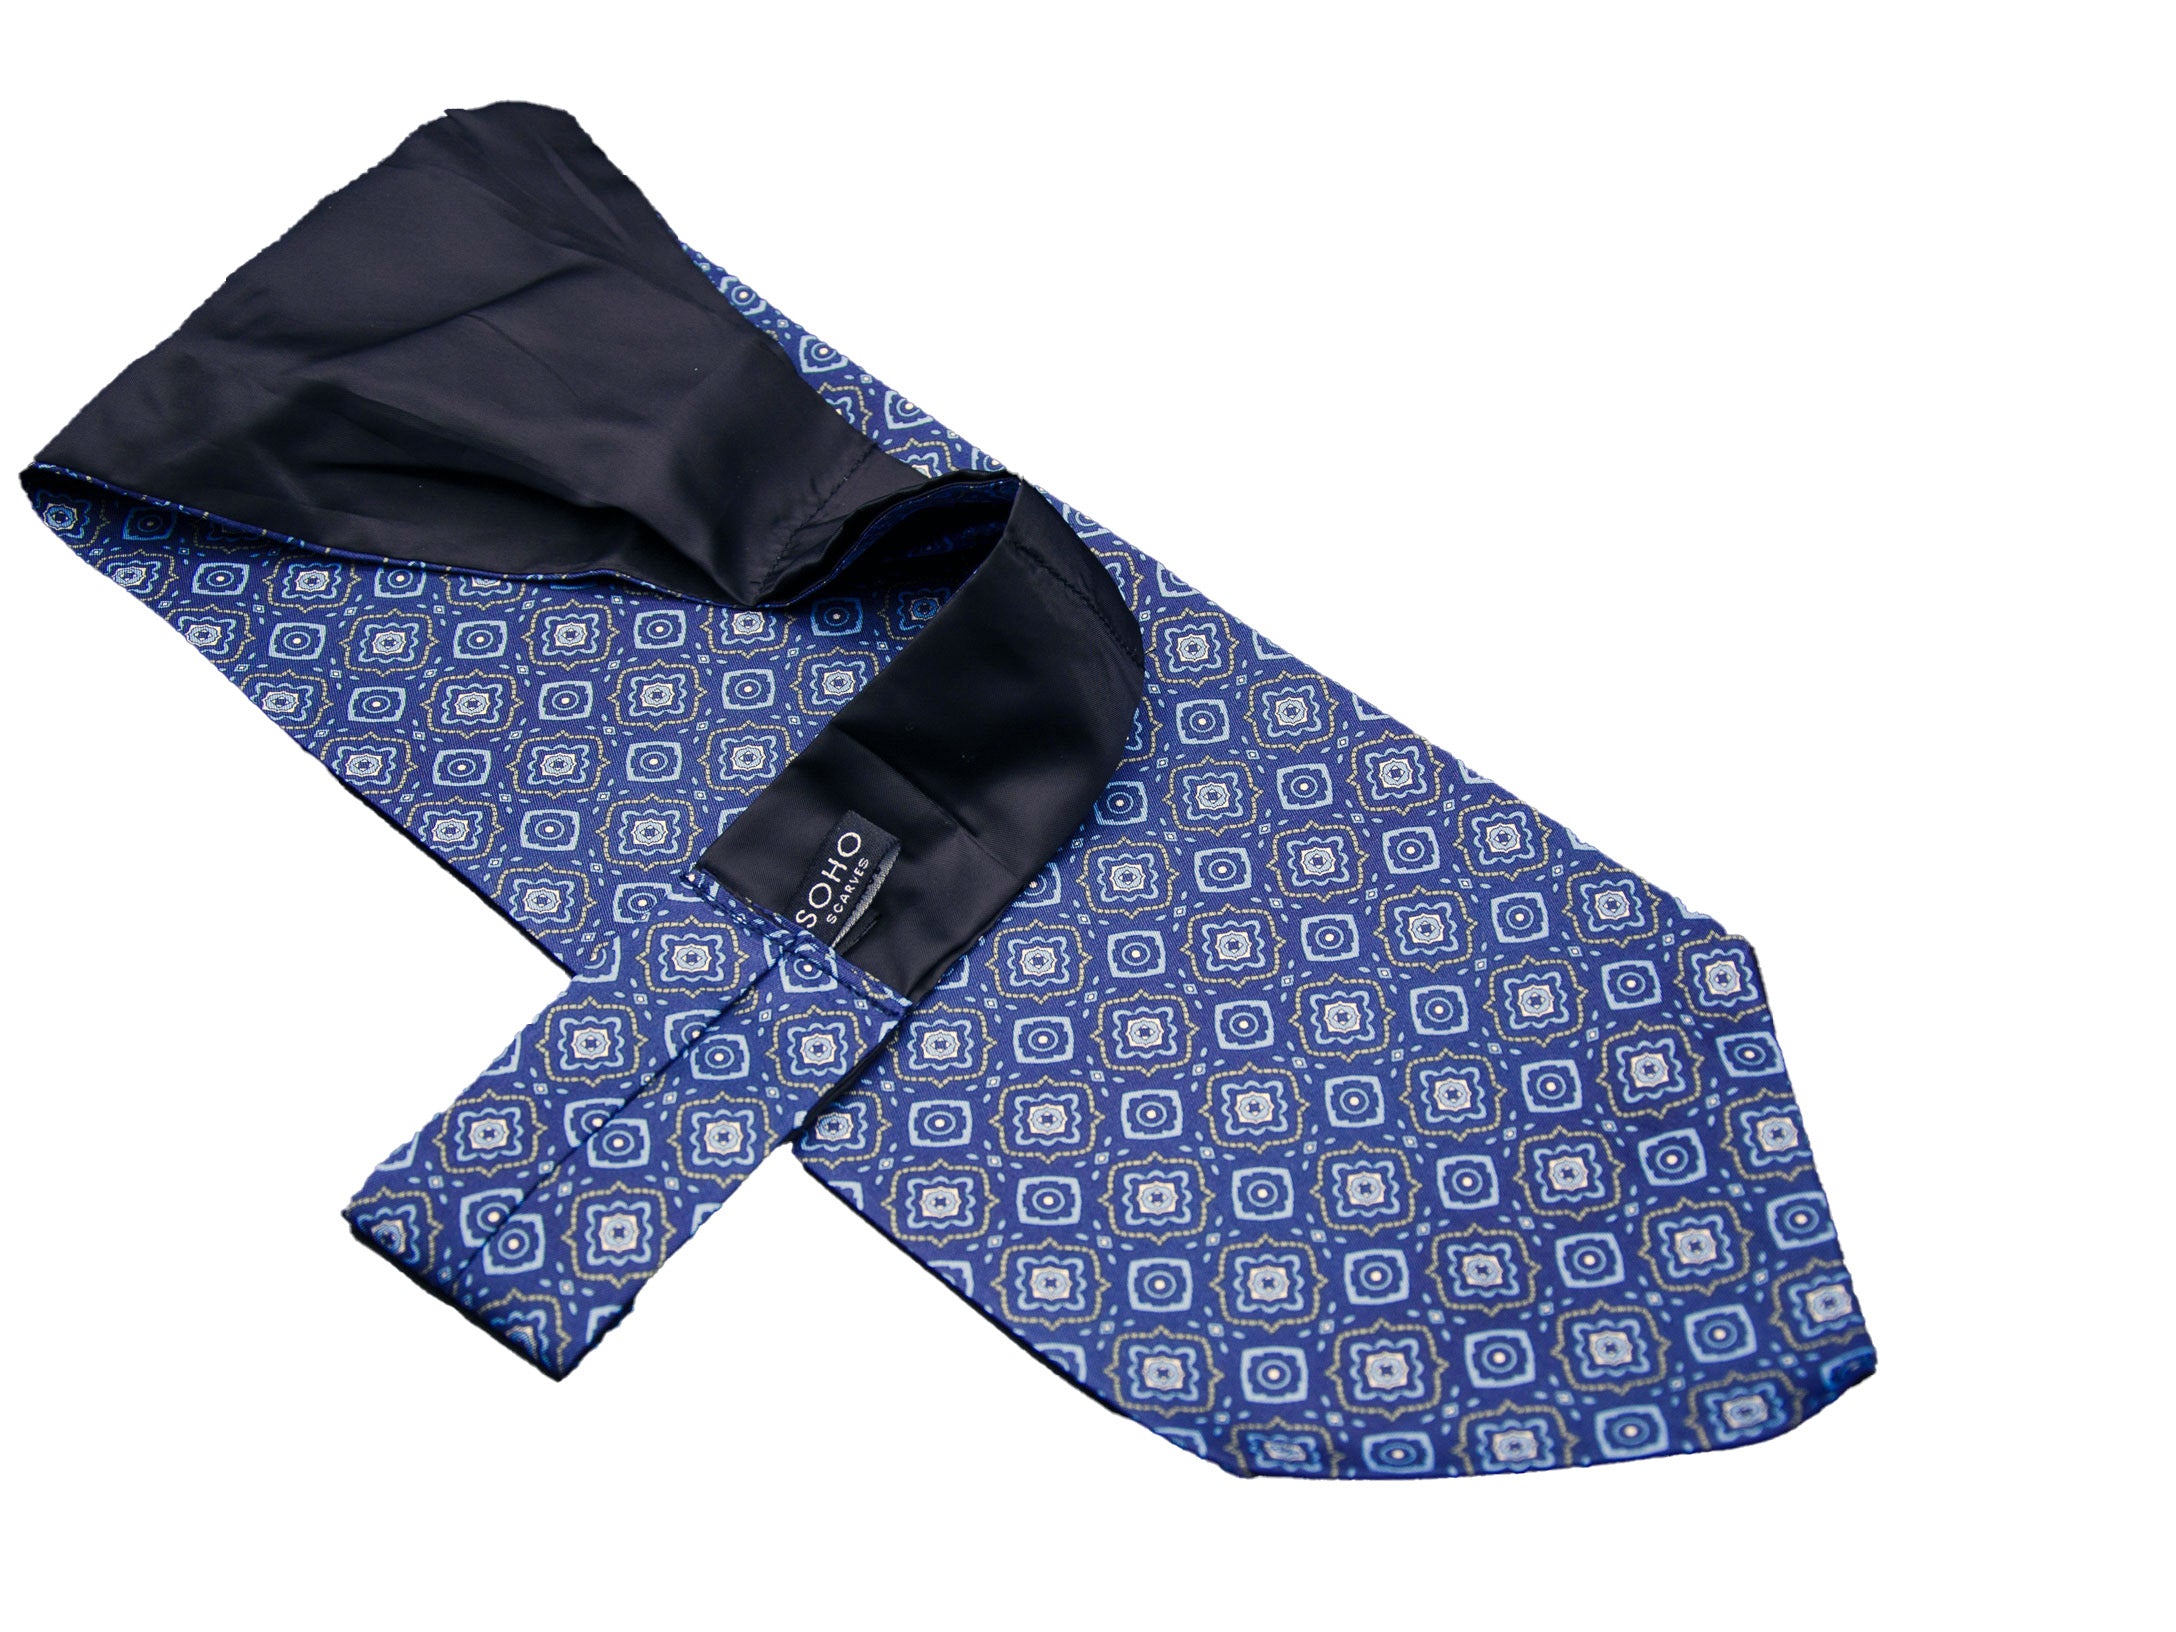 Blue 'Seville' single pointed Ascot tie arranged diagonally with wide point in foreground and clear view of pale blue motifs made up of offset floral-inspired diamond patterns with golden accents.